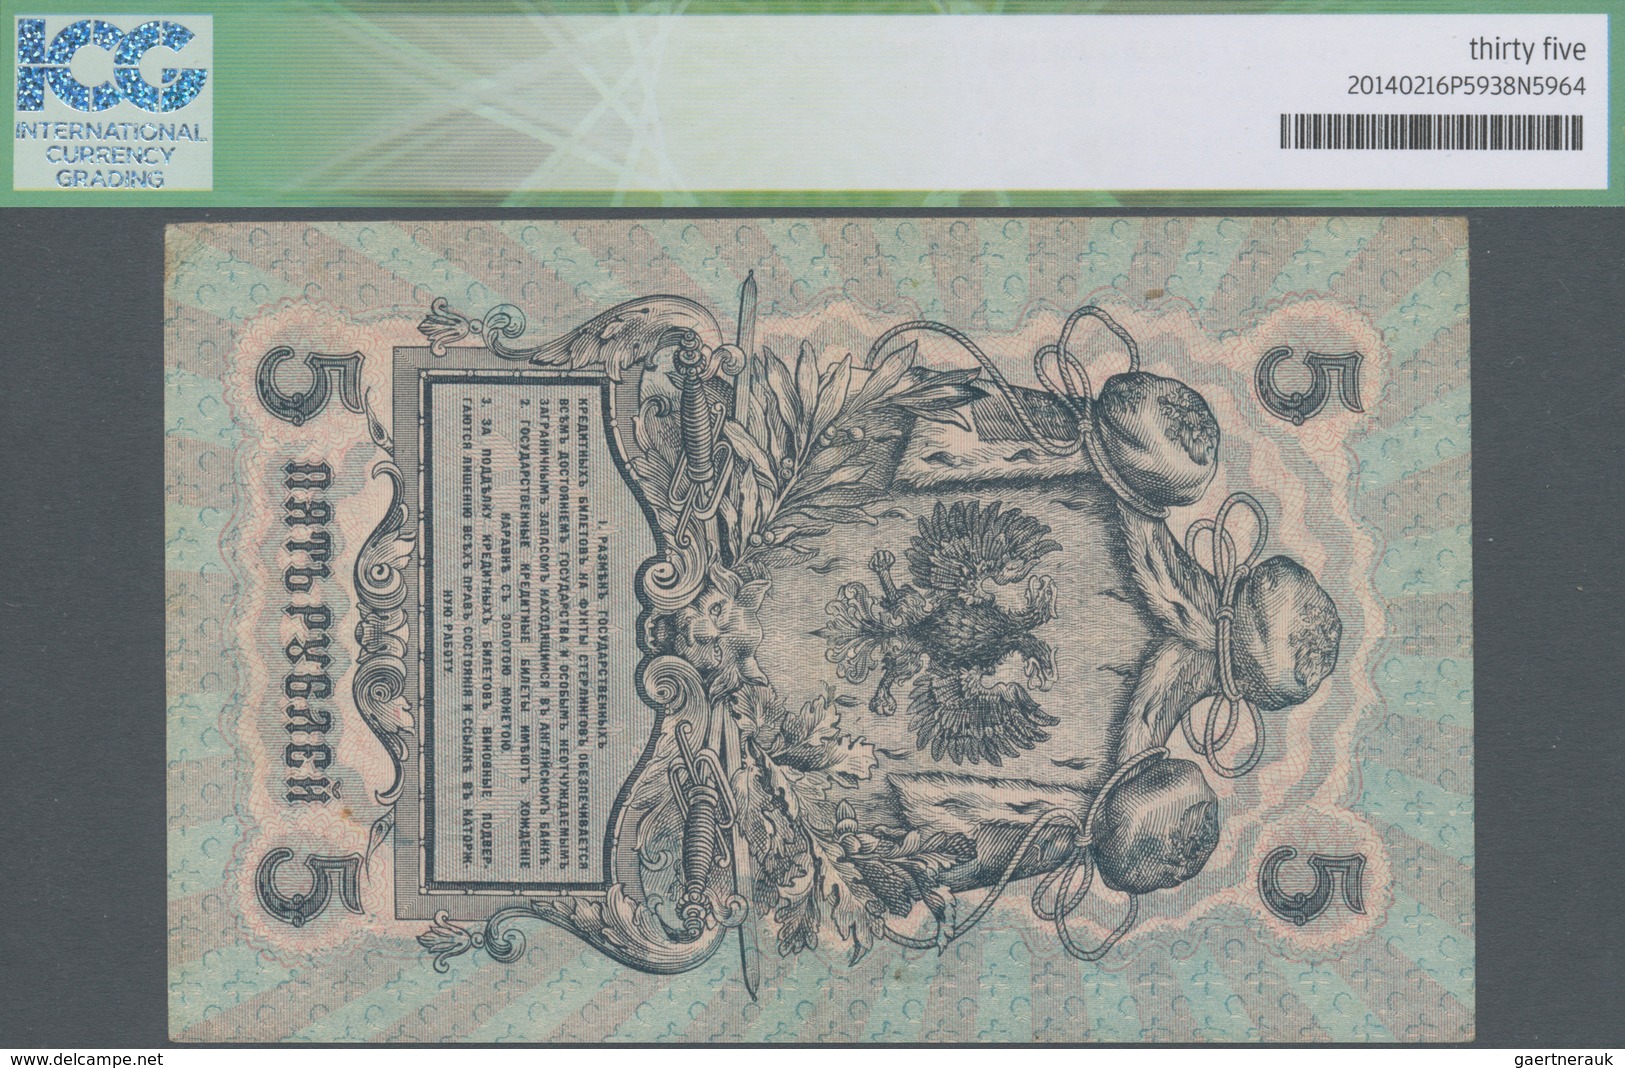 Russia / Russland: North Russia, Chaikovskii Government 5 Rubles 1919, P.S146, Lightly Toned Paper W - Russland